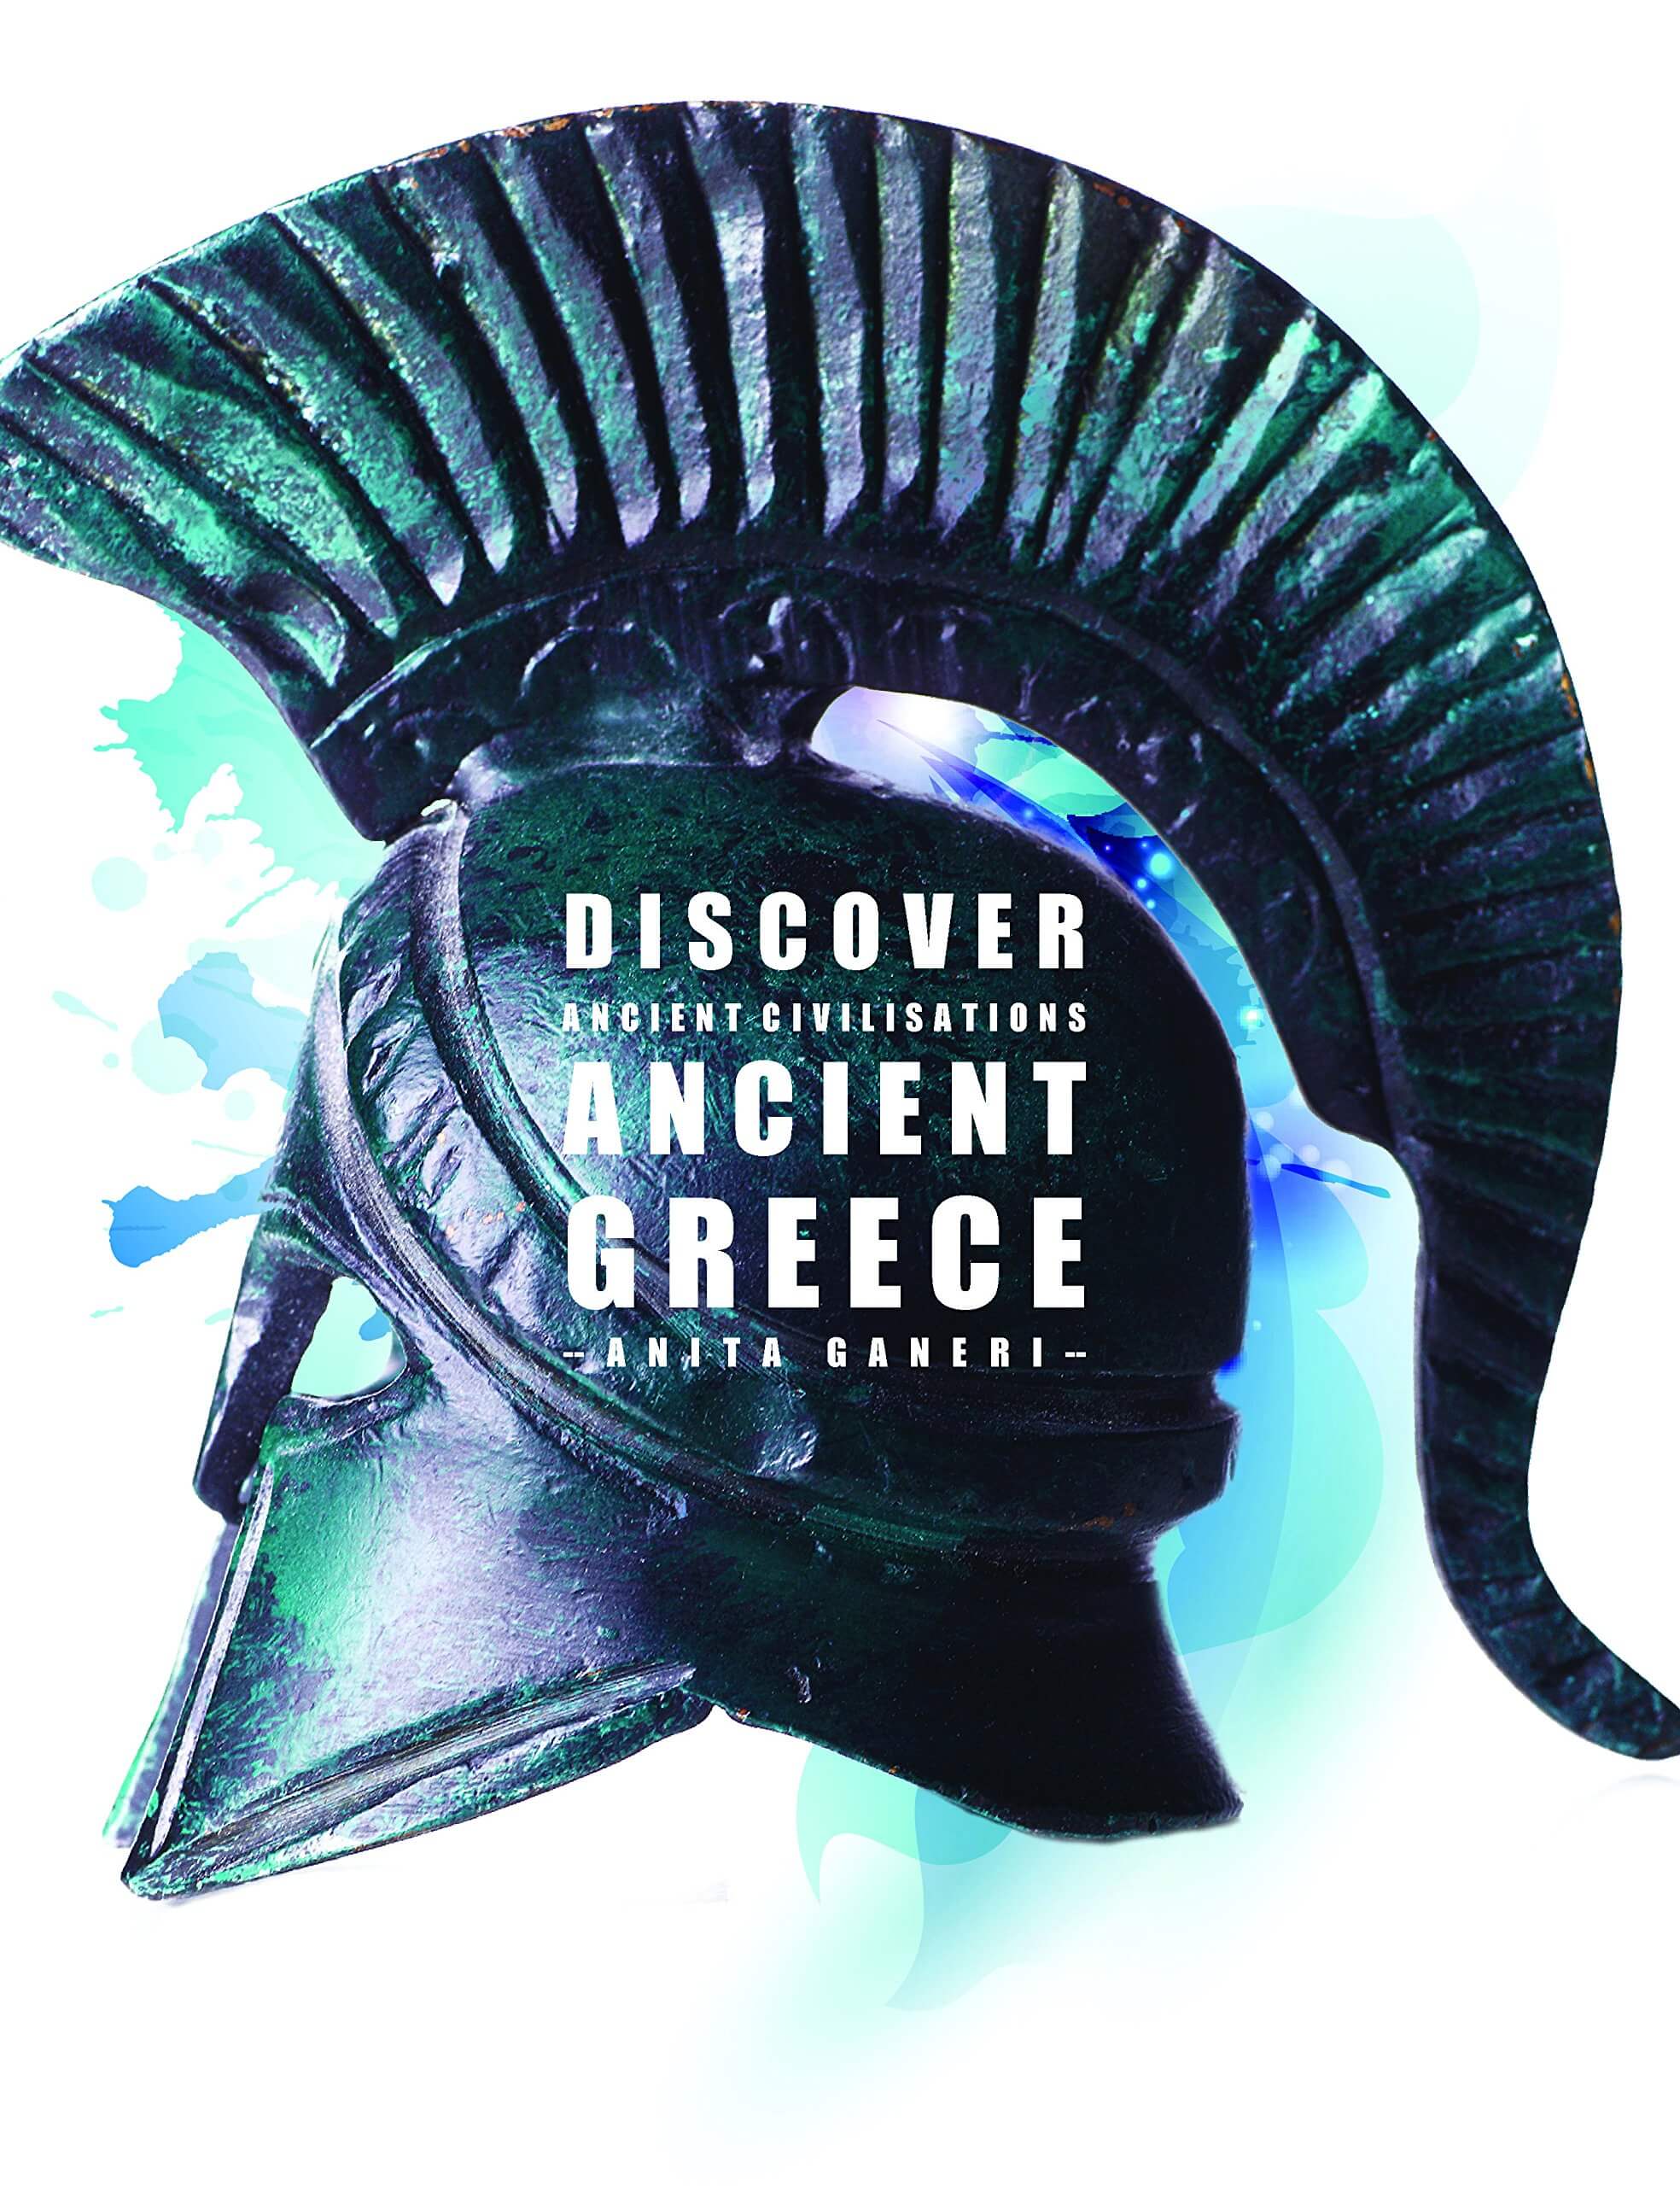 Ancient Greece 10 Books (KS2) by BookLife